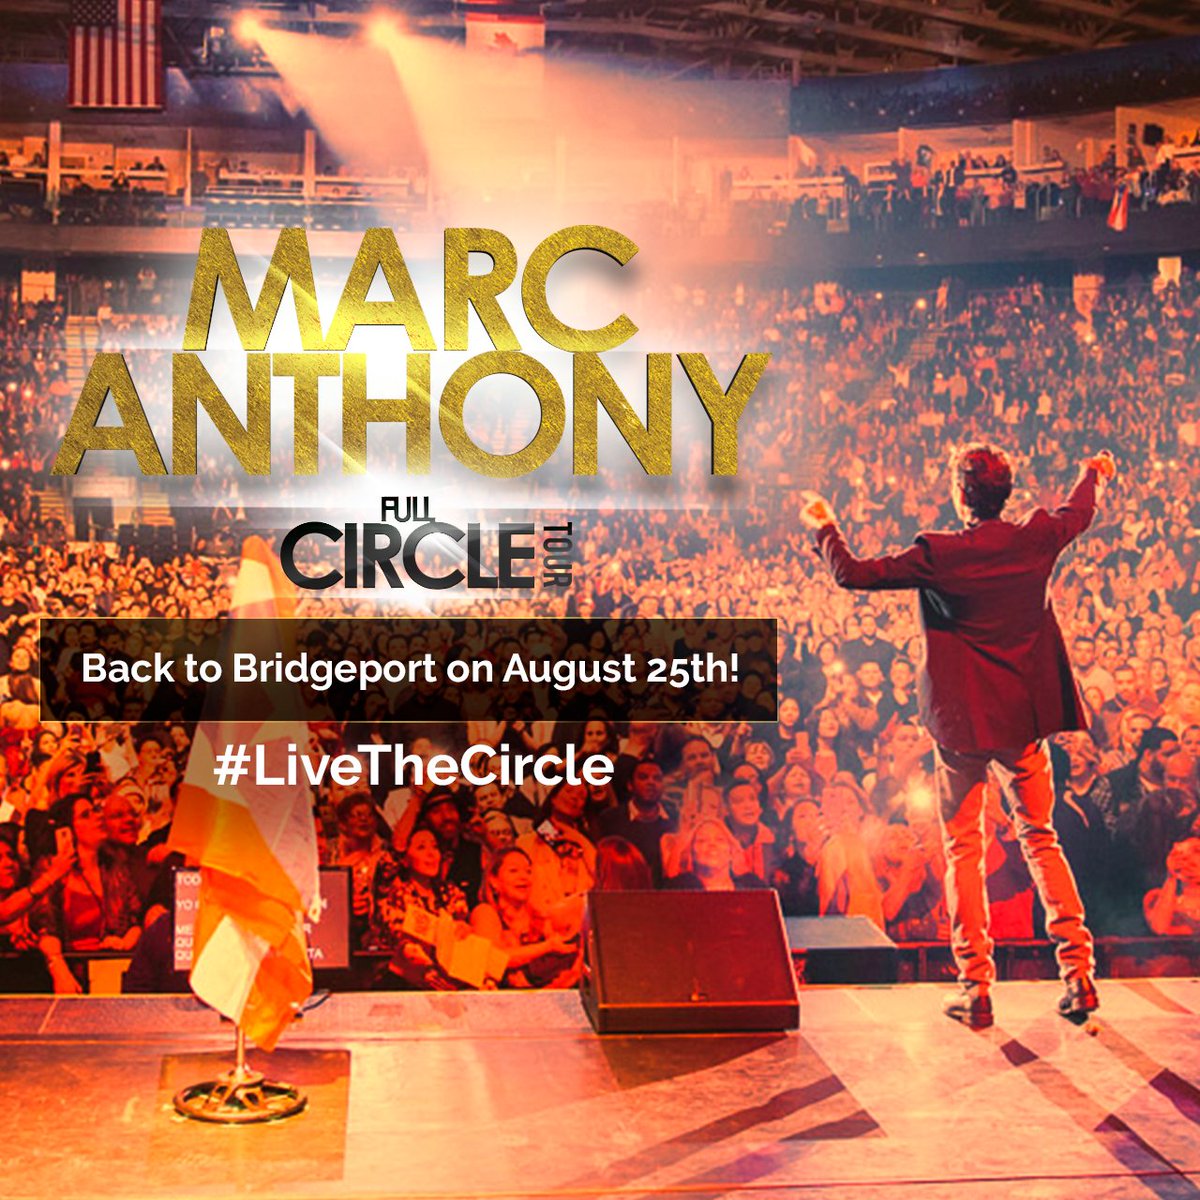 Bridgeport, are you ready for the #FullCircleTour? Get your tickets: https://t.co/Gm9f7Gxjo1. #LiveTheCircle https://t.co/jE92wl2ktJ